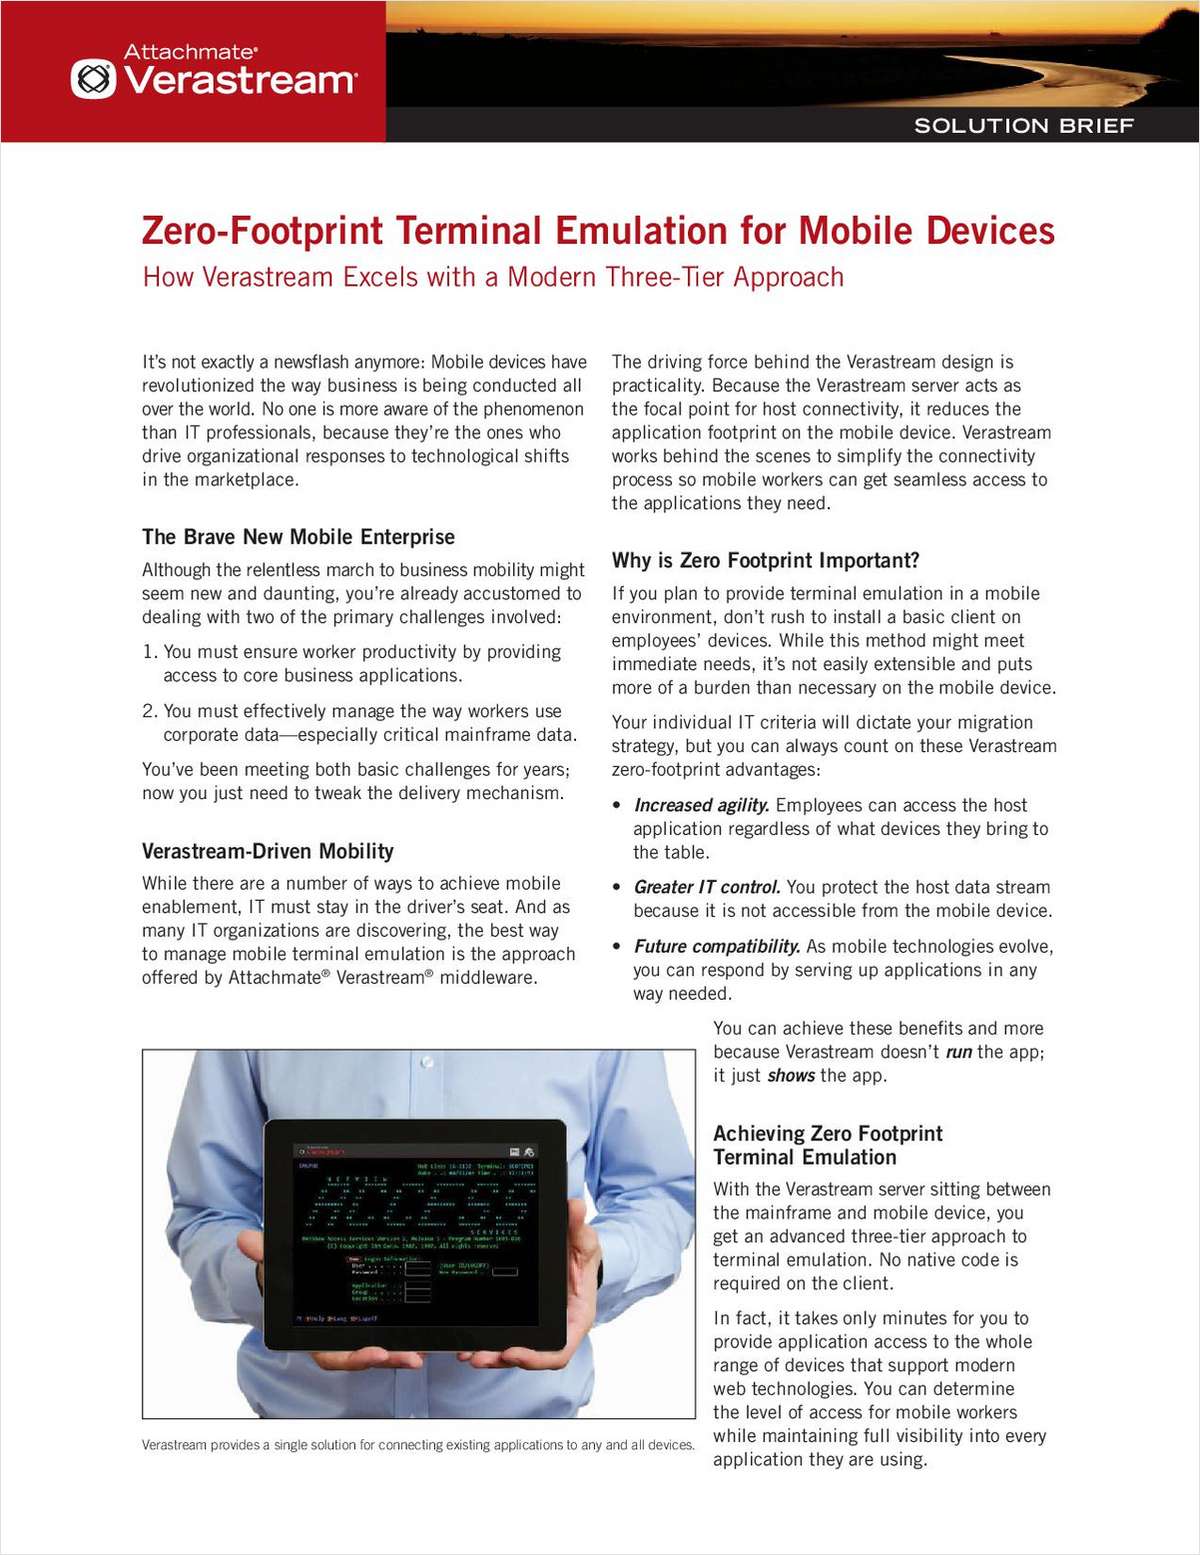 Zero-Footprint Mainframe Terminal Emulation for Mobile Devices